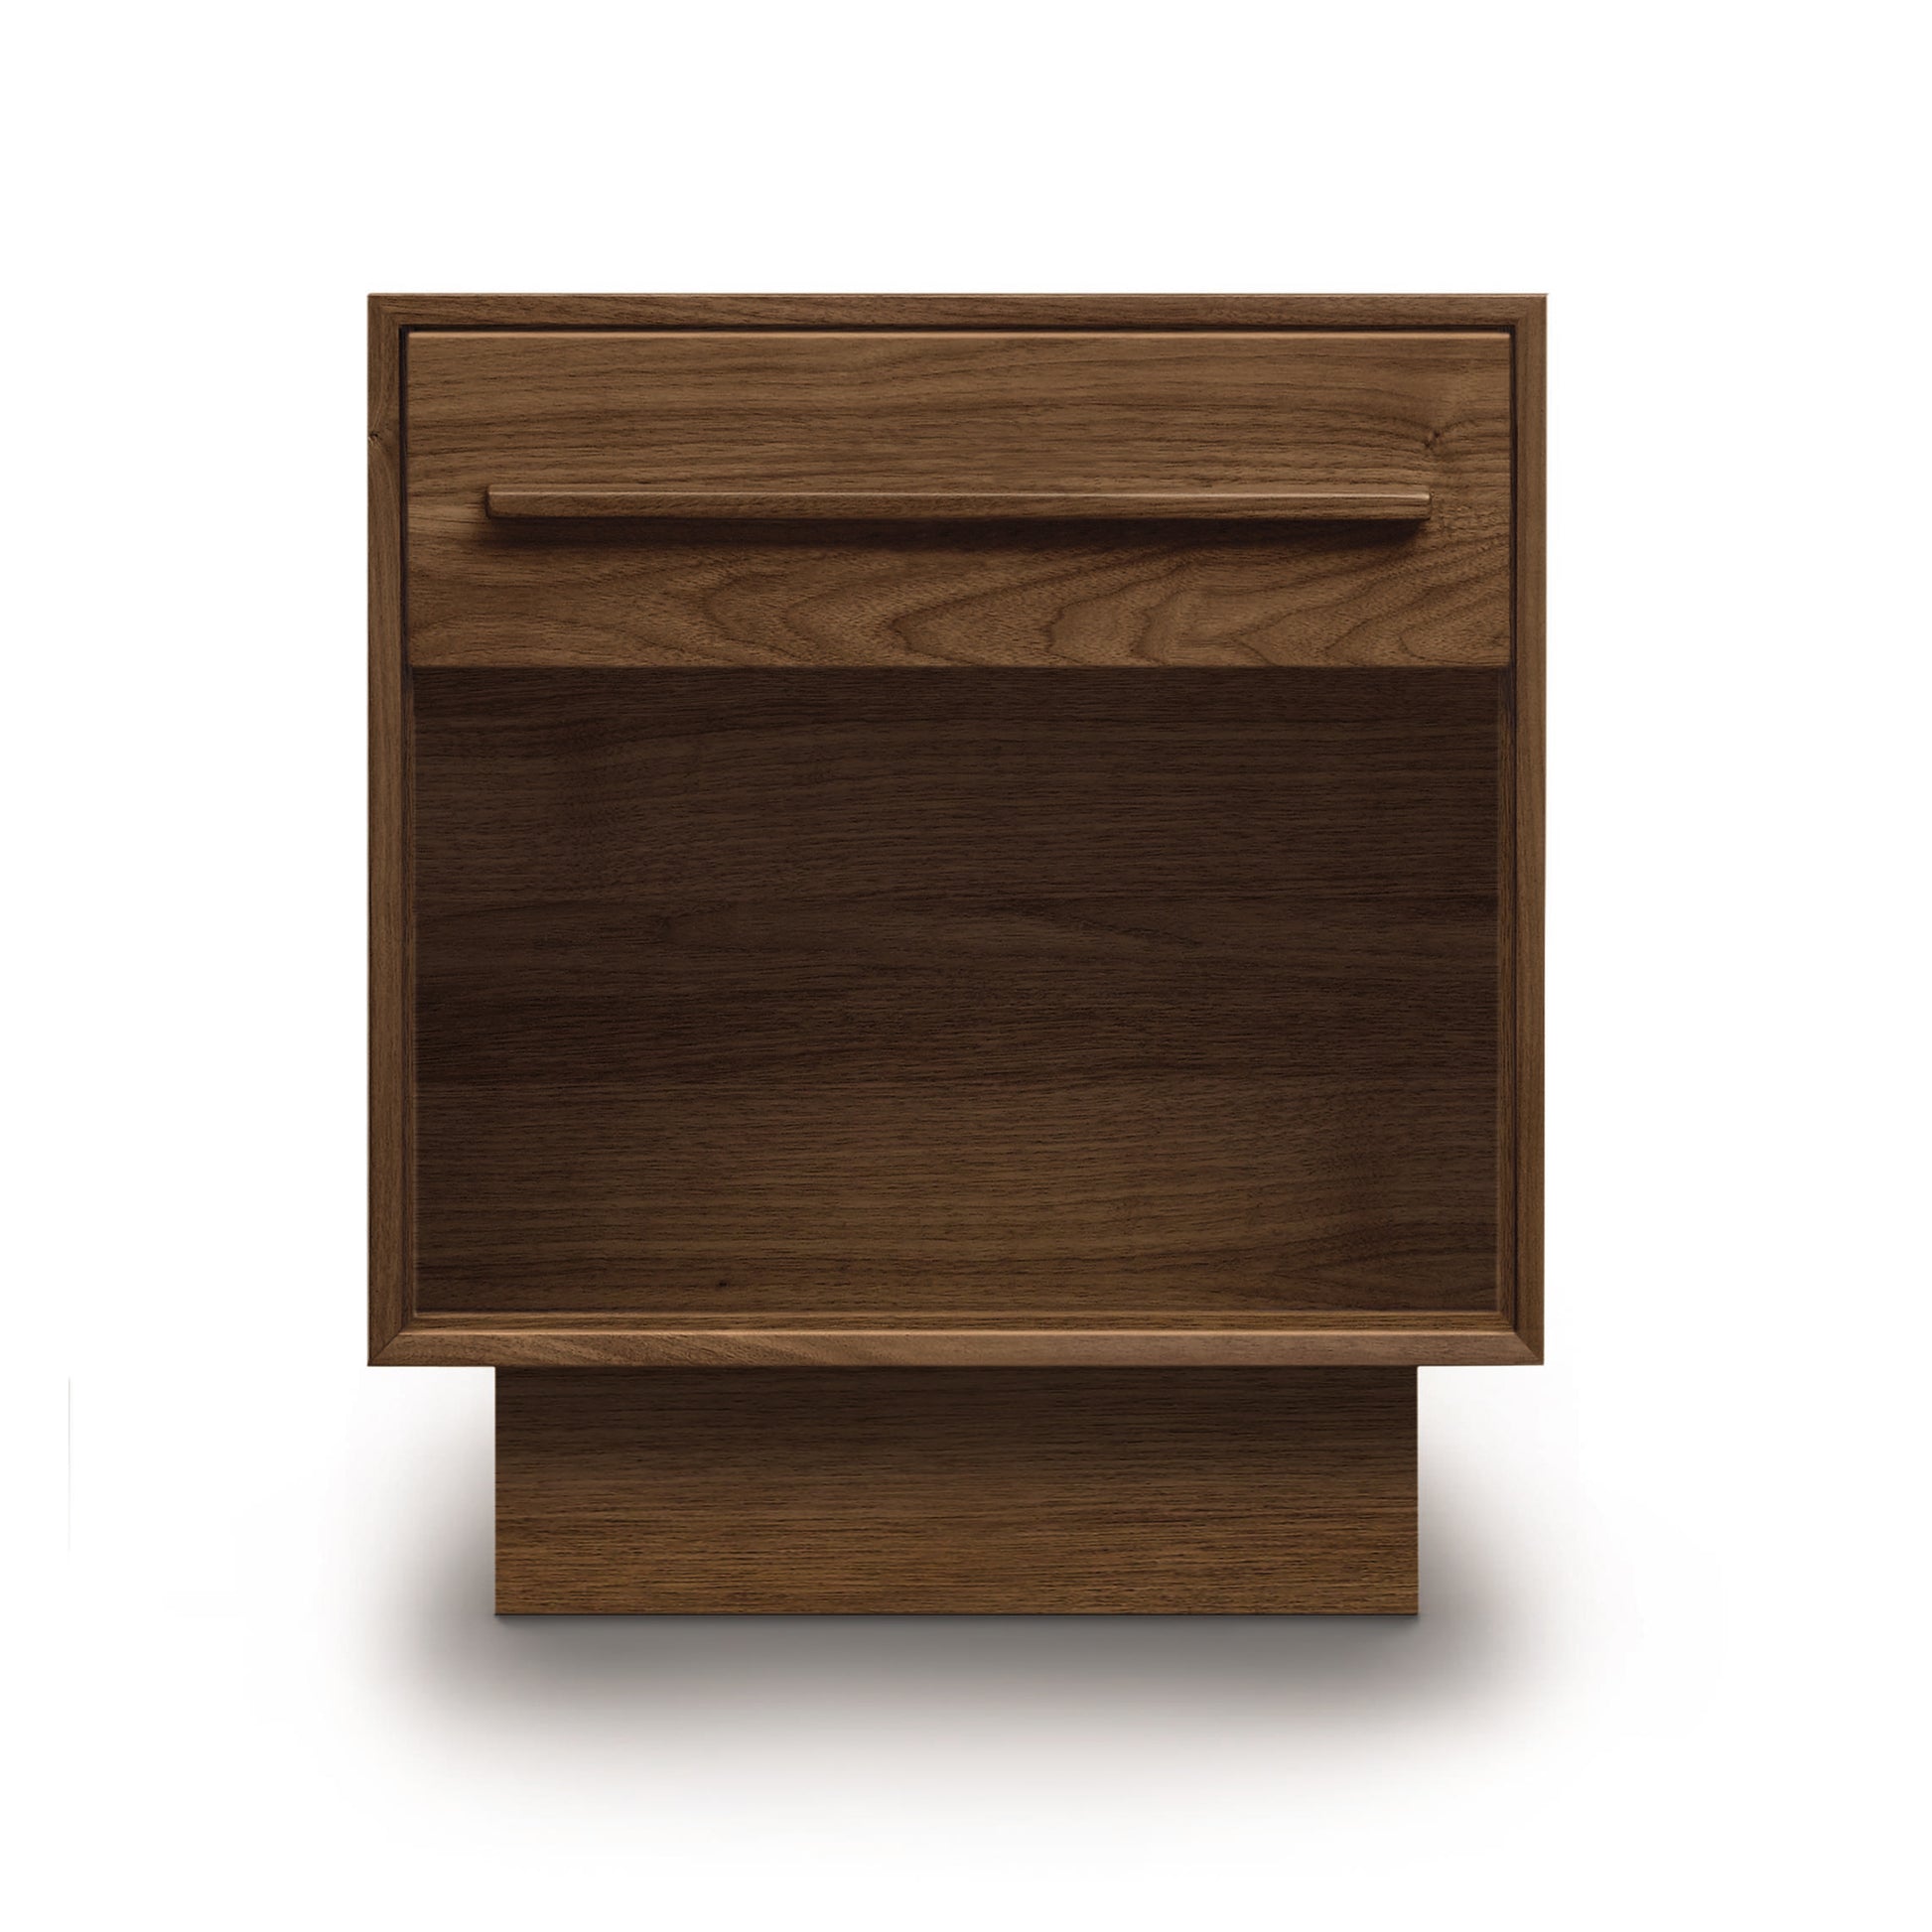 A Copeland Furniture Moduluxe 1-Drawer Enclosed Shelf Nightstand, made of wood, featuring a single drawer on top.